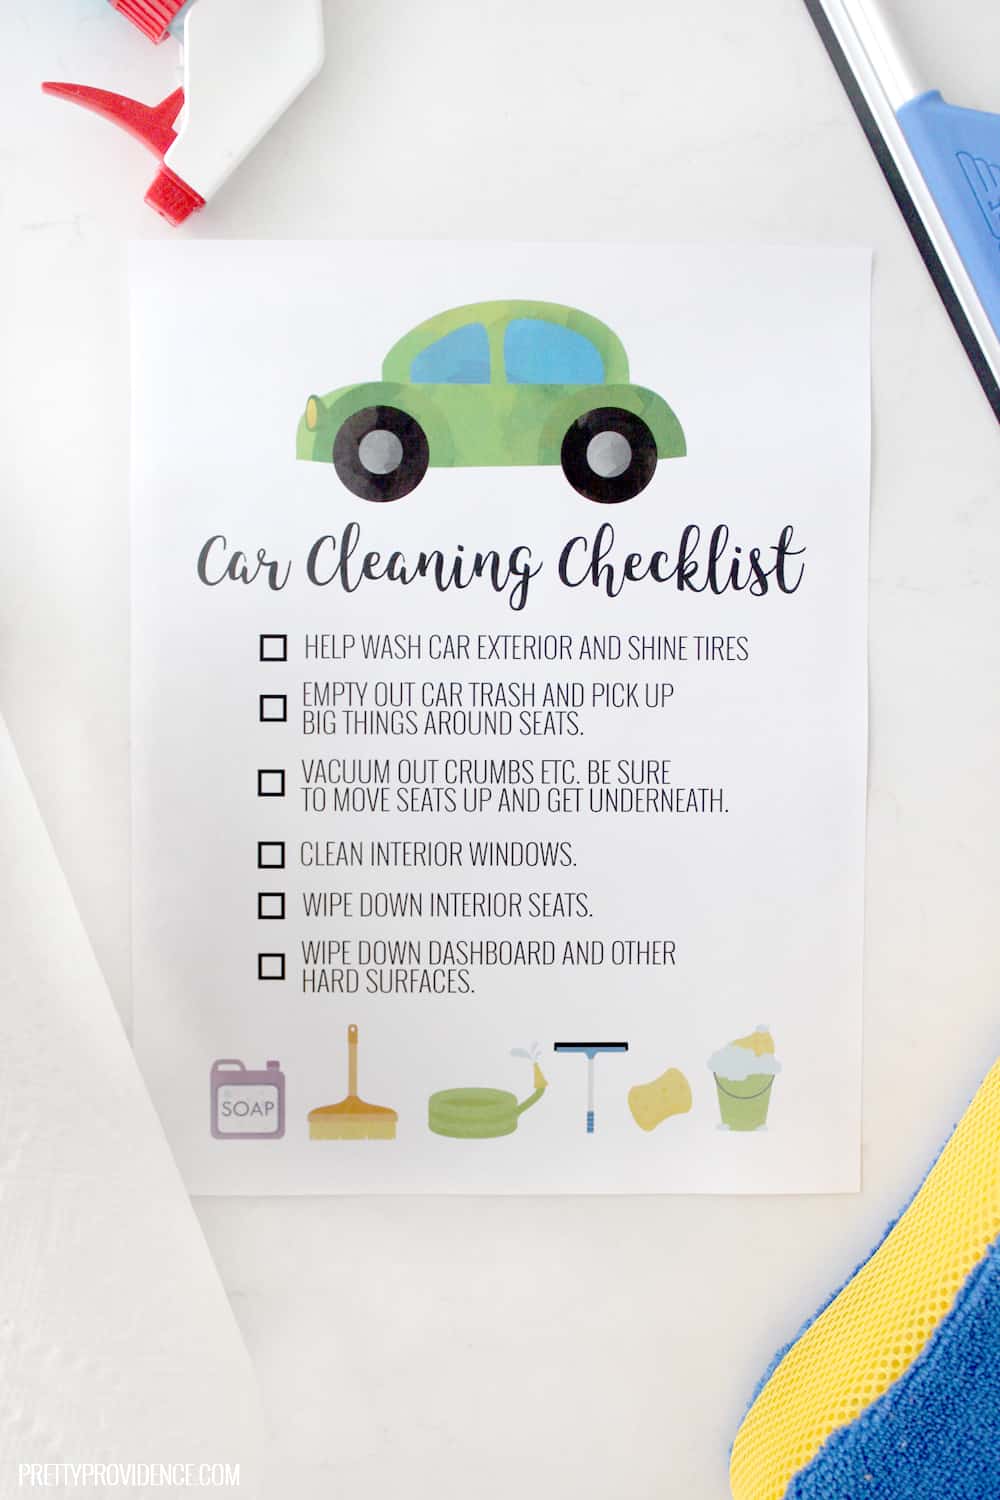 Car cleaning checklist - this is a great way to teach your kids how to clean a car!